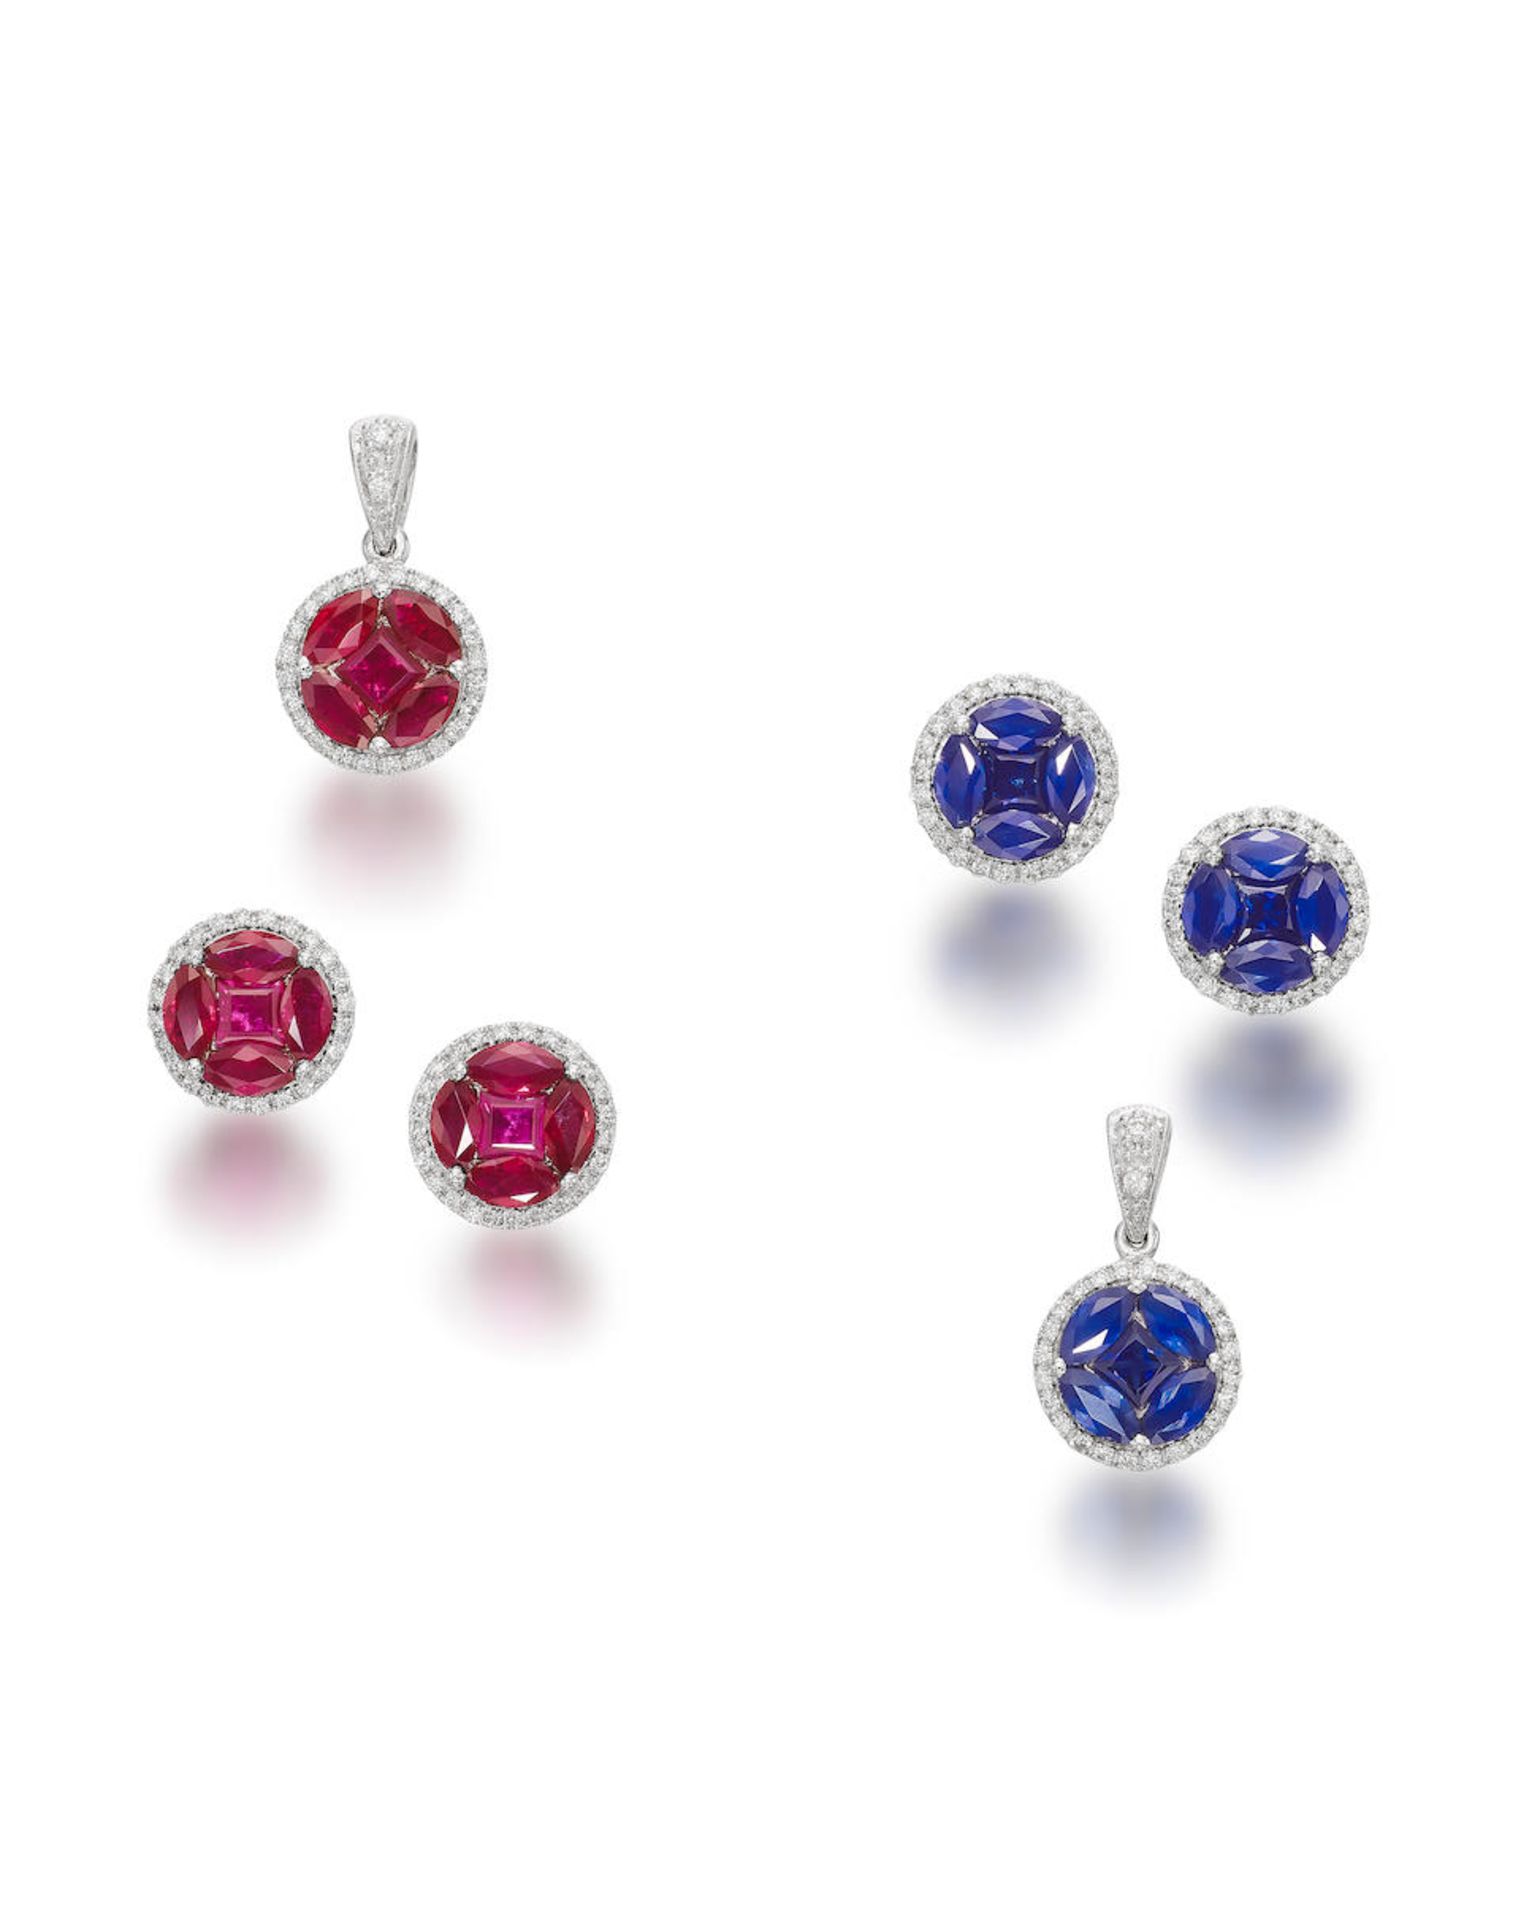 TWO RUBY, SAPPHIRE AND DIAMOND PENDANT AND EARSTUD SETS (4)